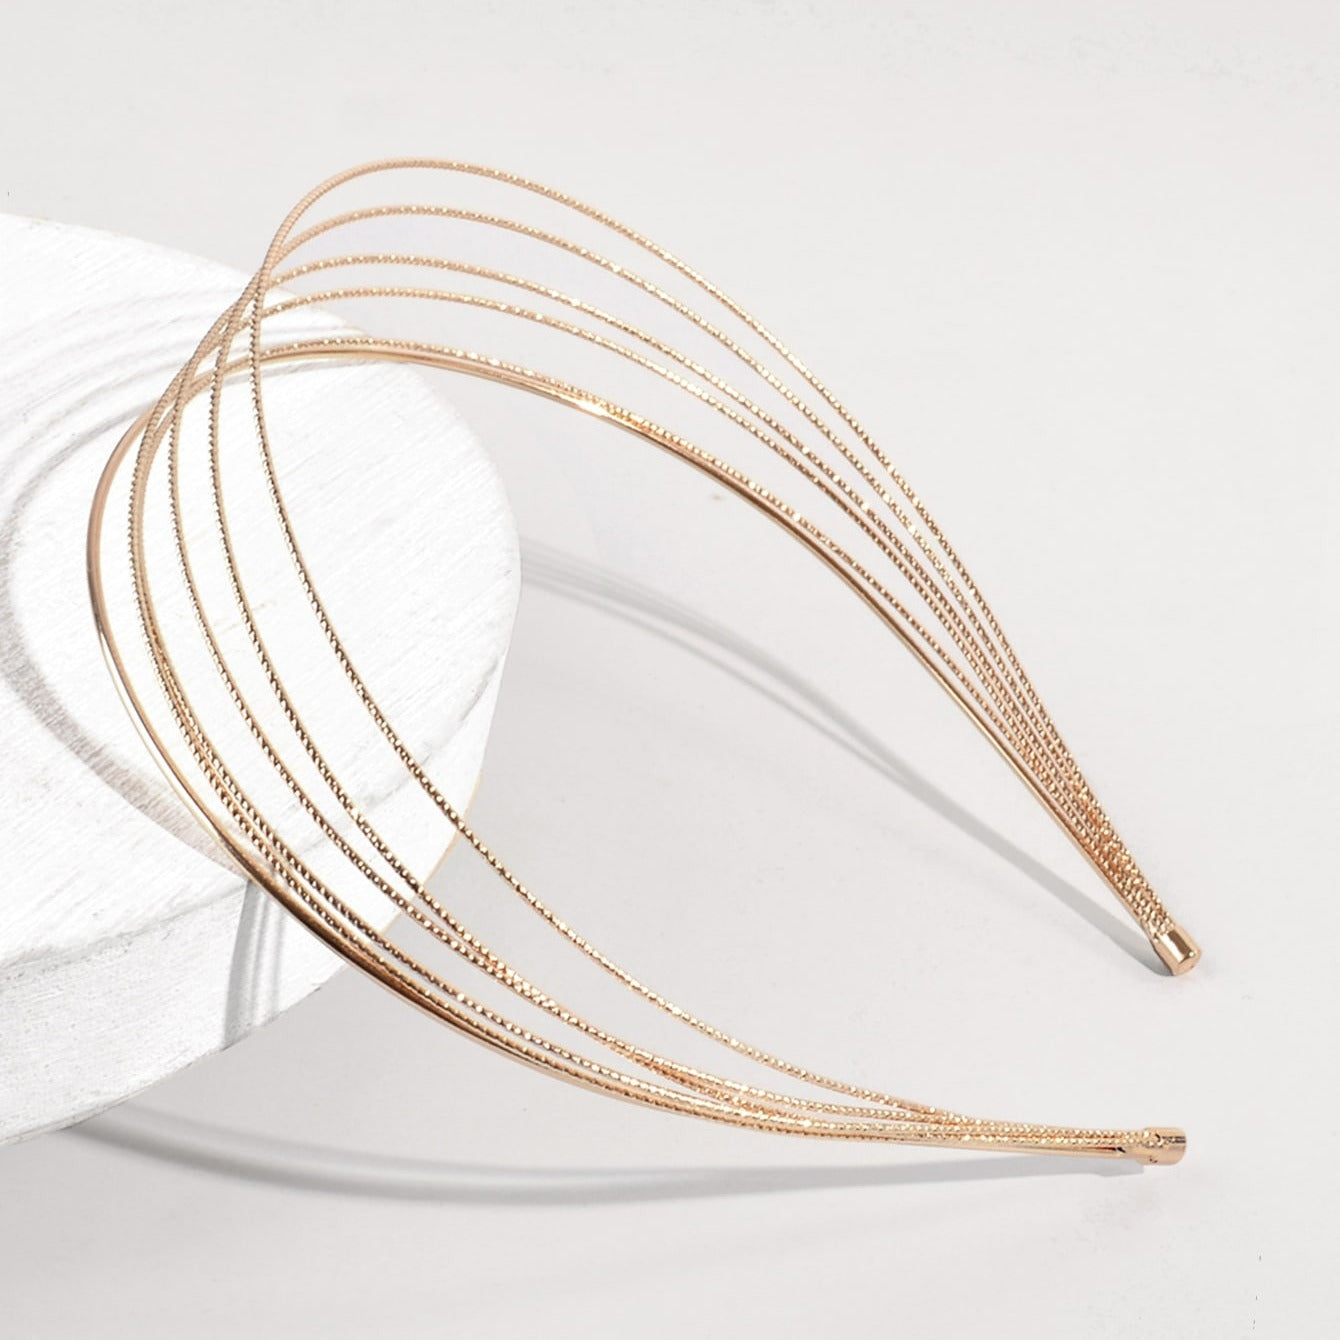 Add a Touch of Luxury to Your Look with Our Golden Alloy Metal Wide Hair Band Head Band - Perfect for Parties and Proms!